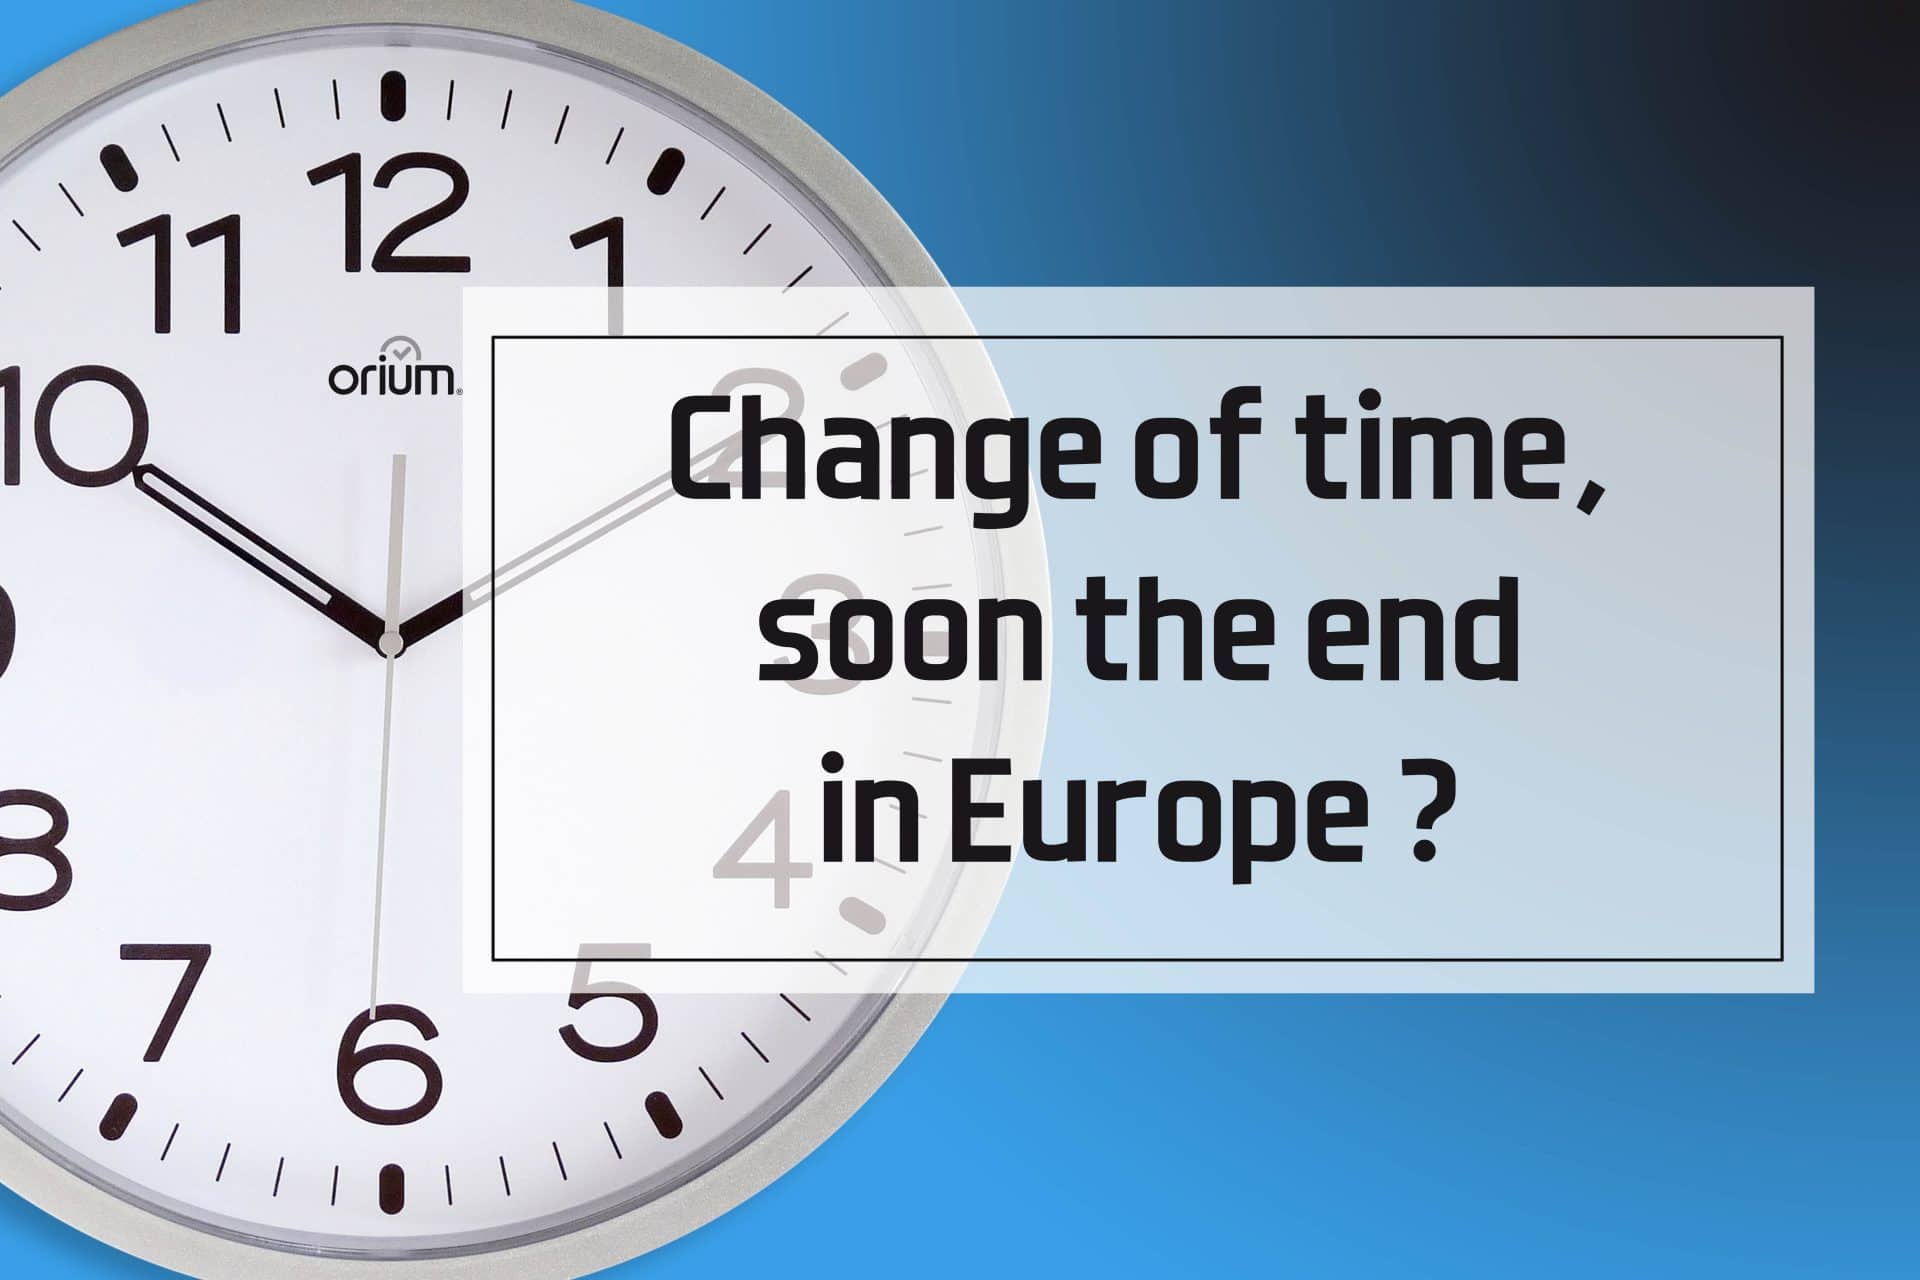 To the end of the Change of Time in Europe?